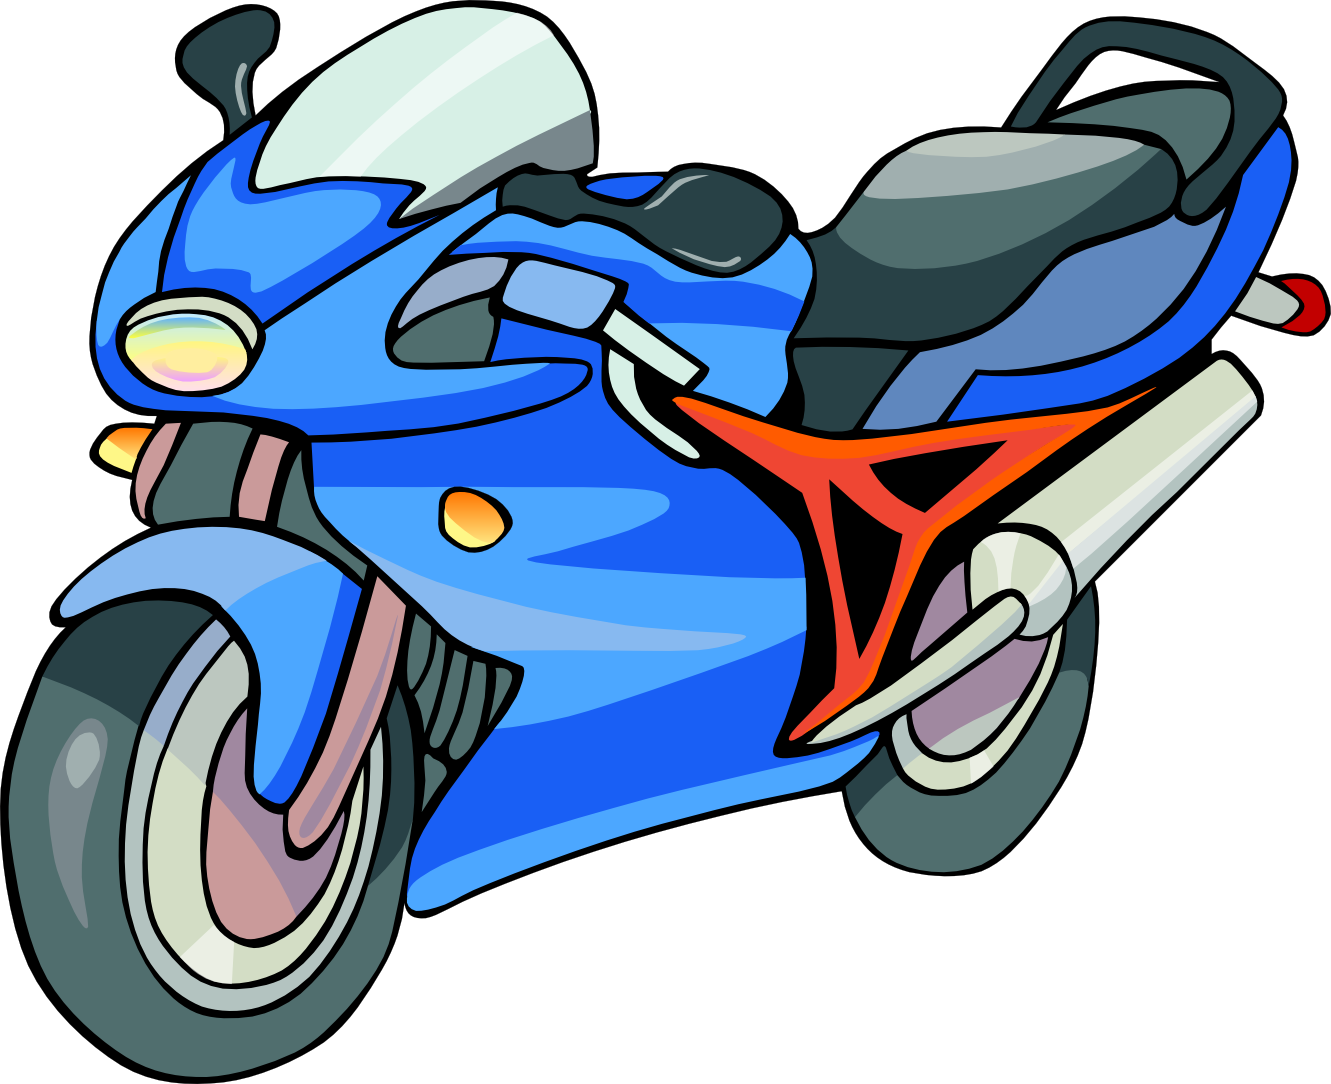 Motorcycle clipart #13, Download drawings